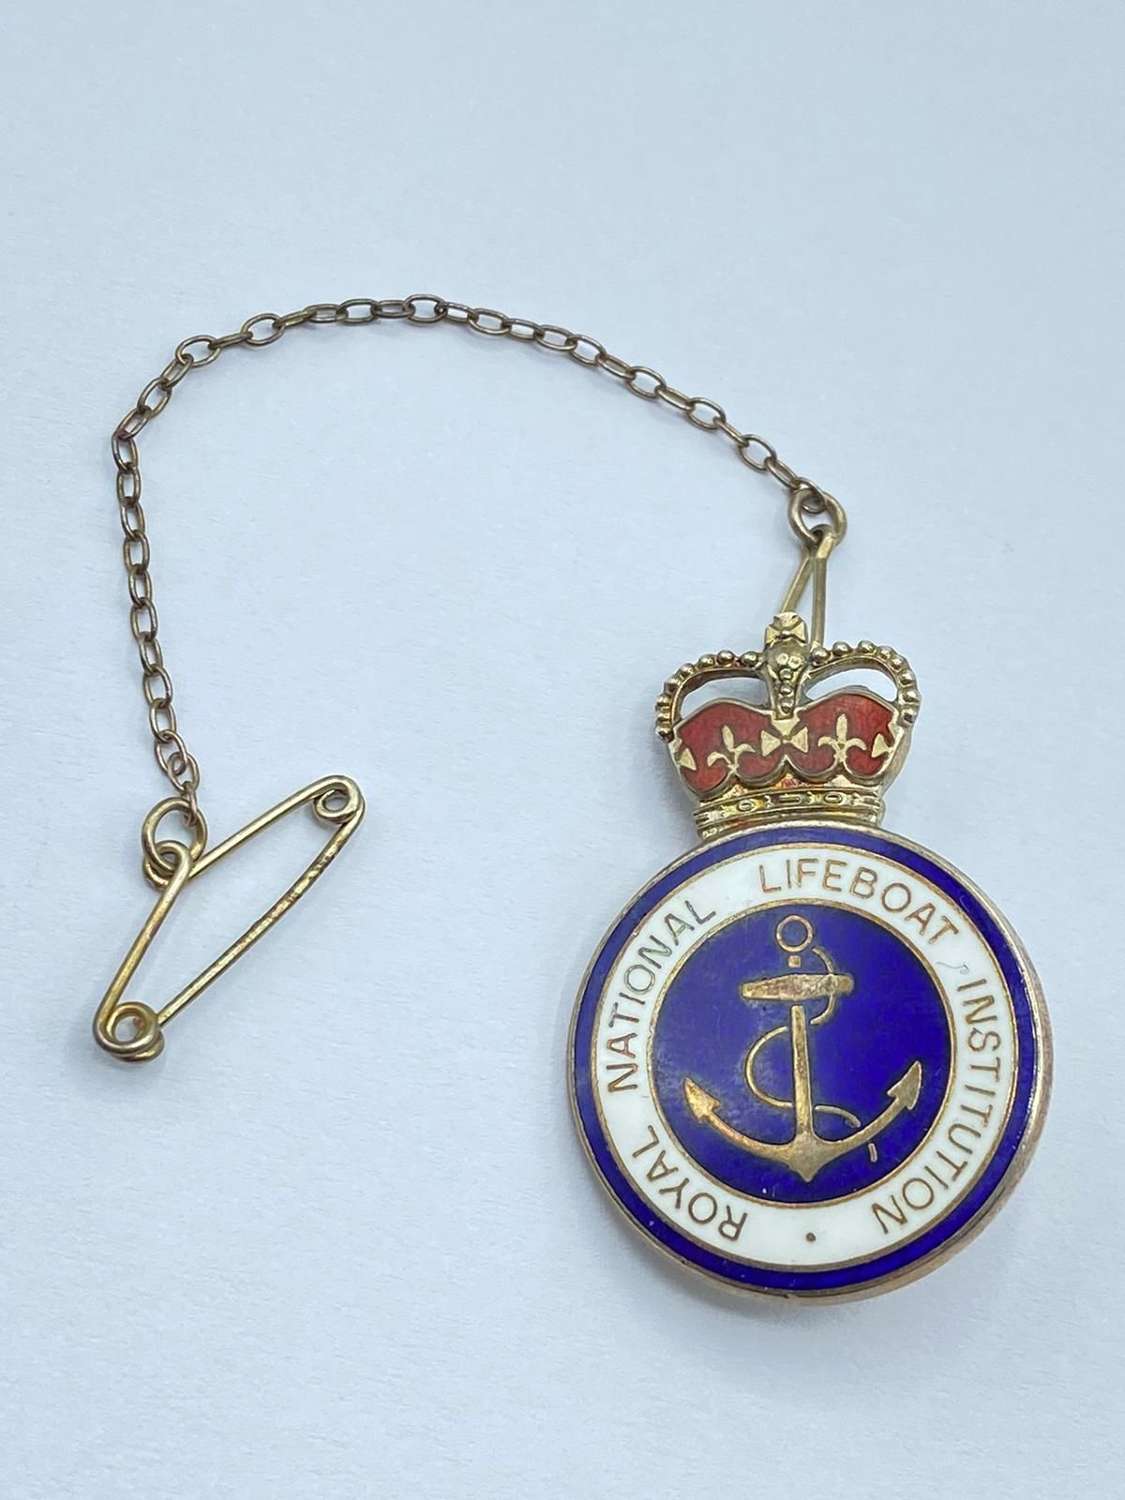 1997 Royal National Lifeboat Institution RNLI Silver Recognition Badge